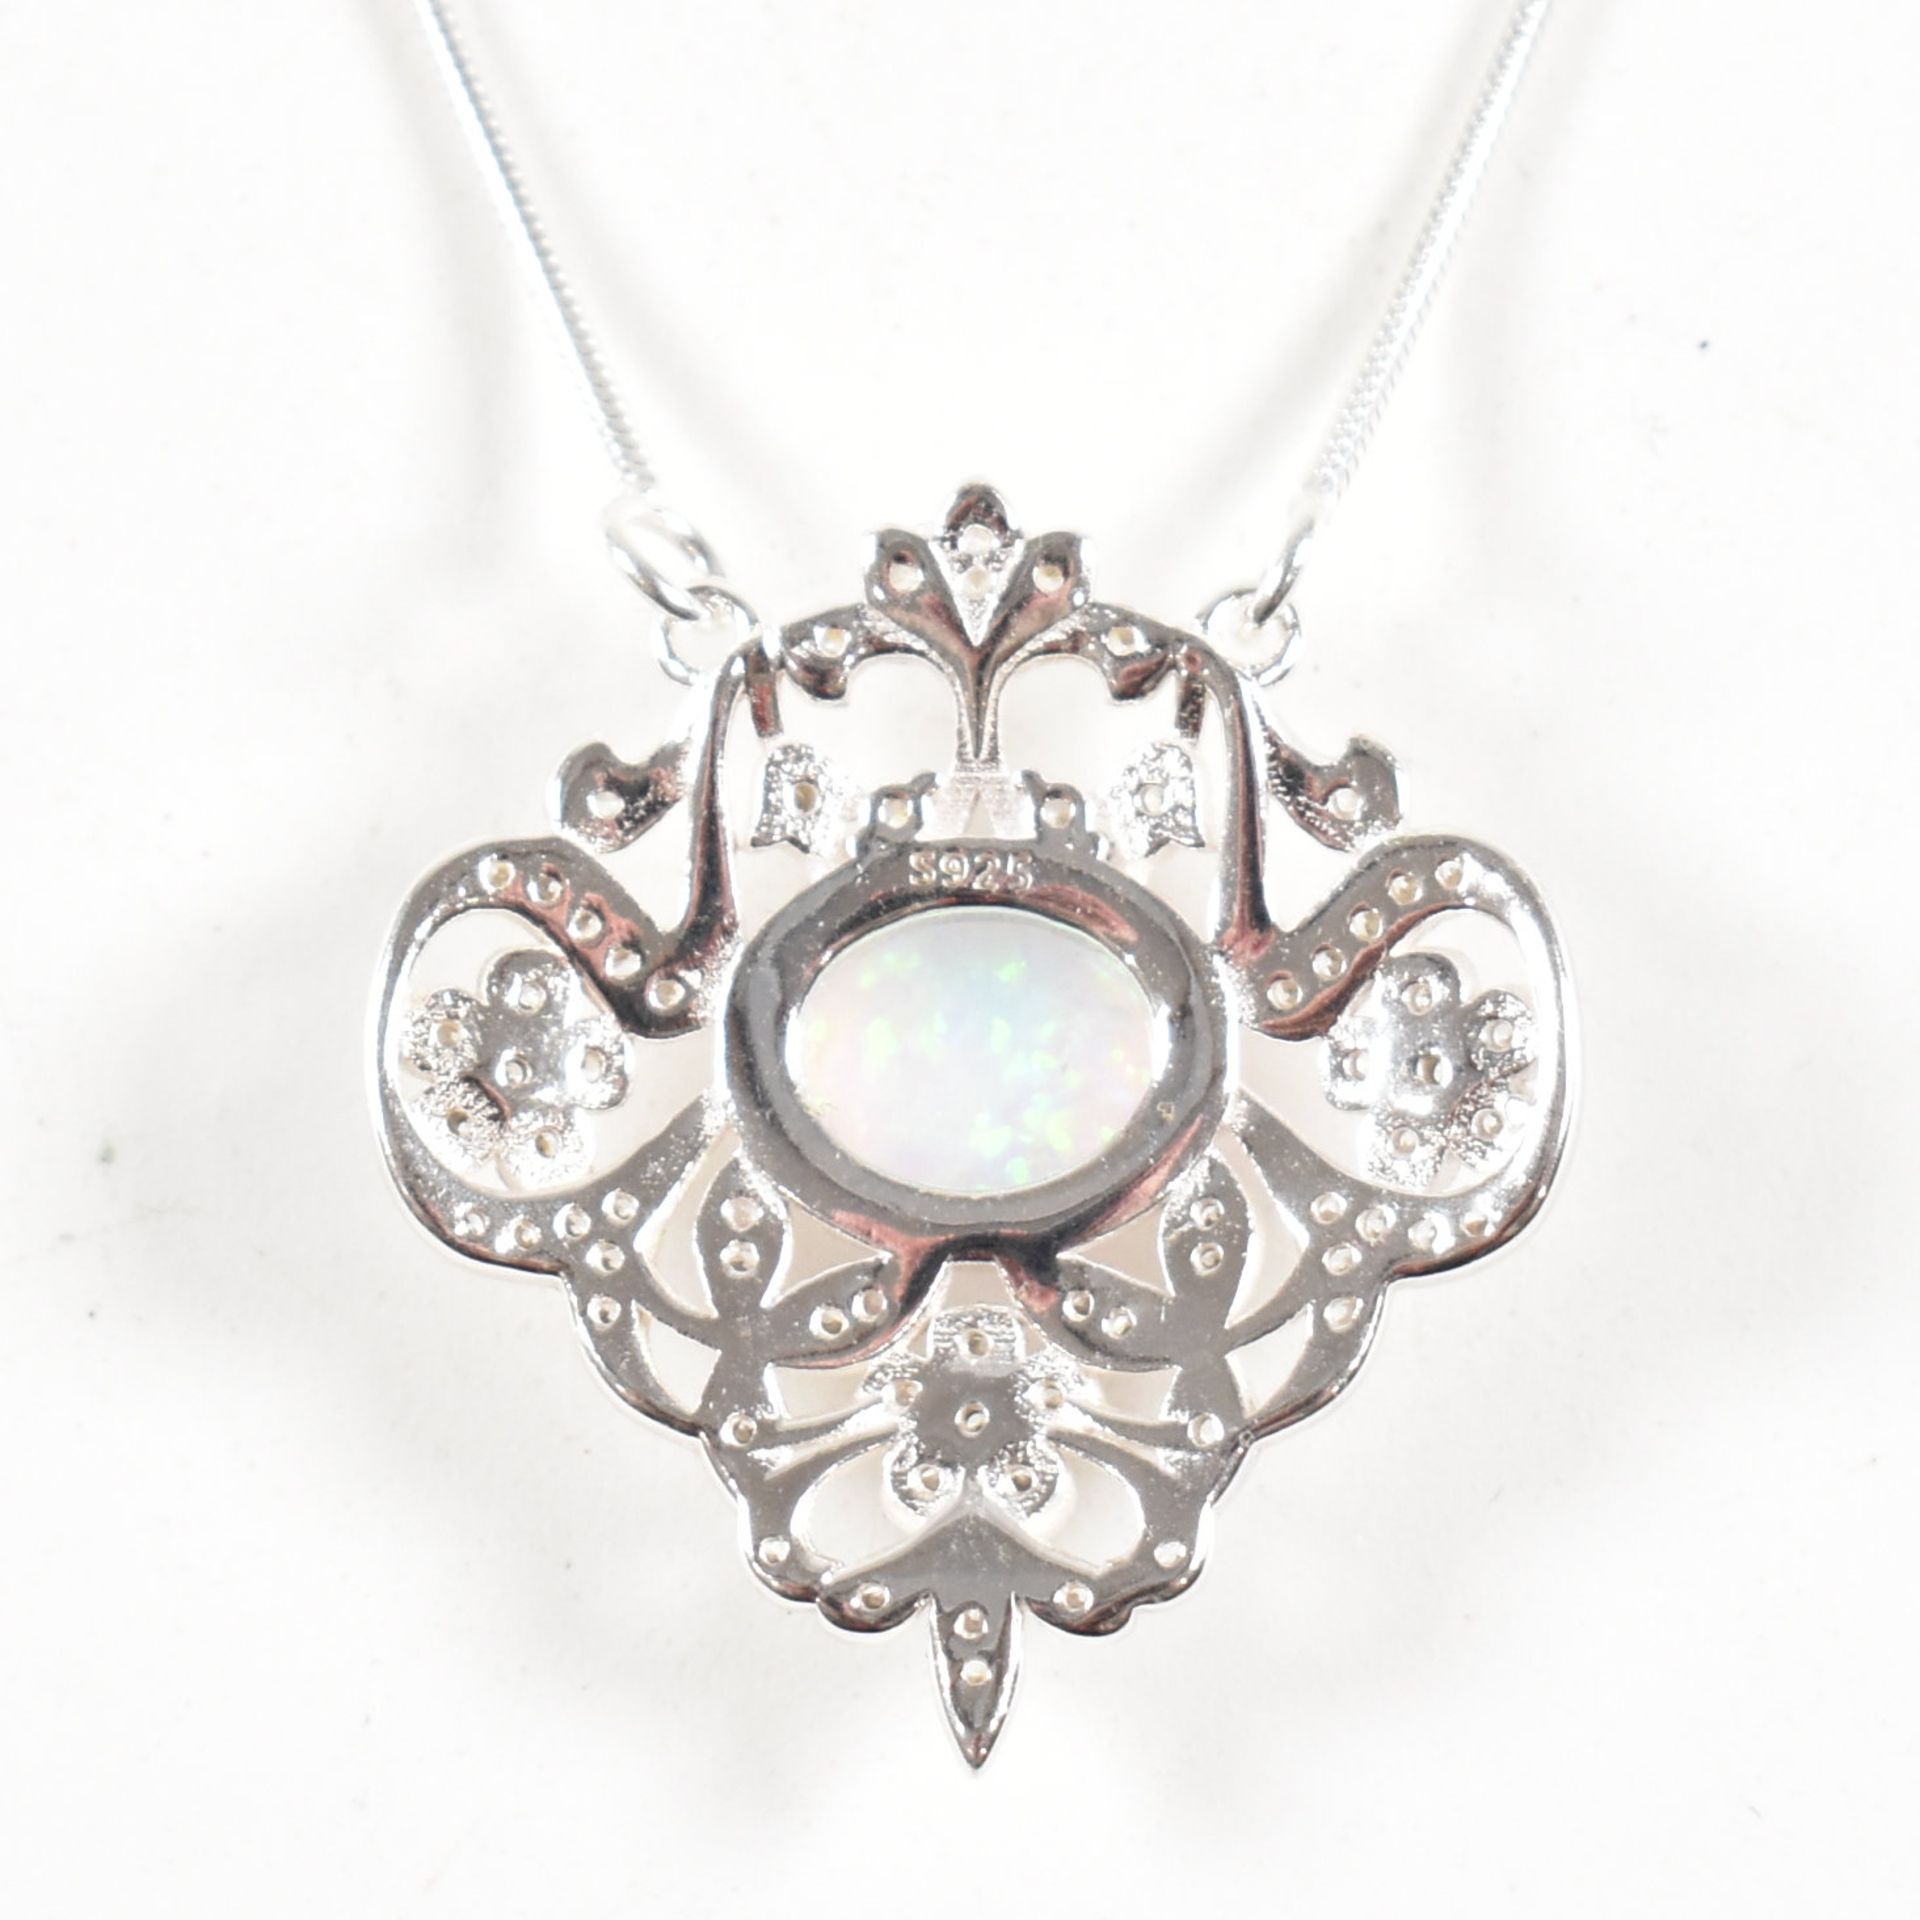 CONTEMPORARY SILVER CZ & OPALITE PENDANT NECKLACE - Image 5 of 5